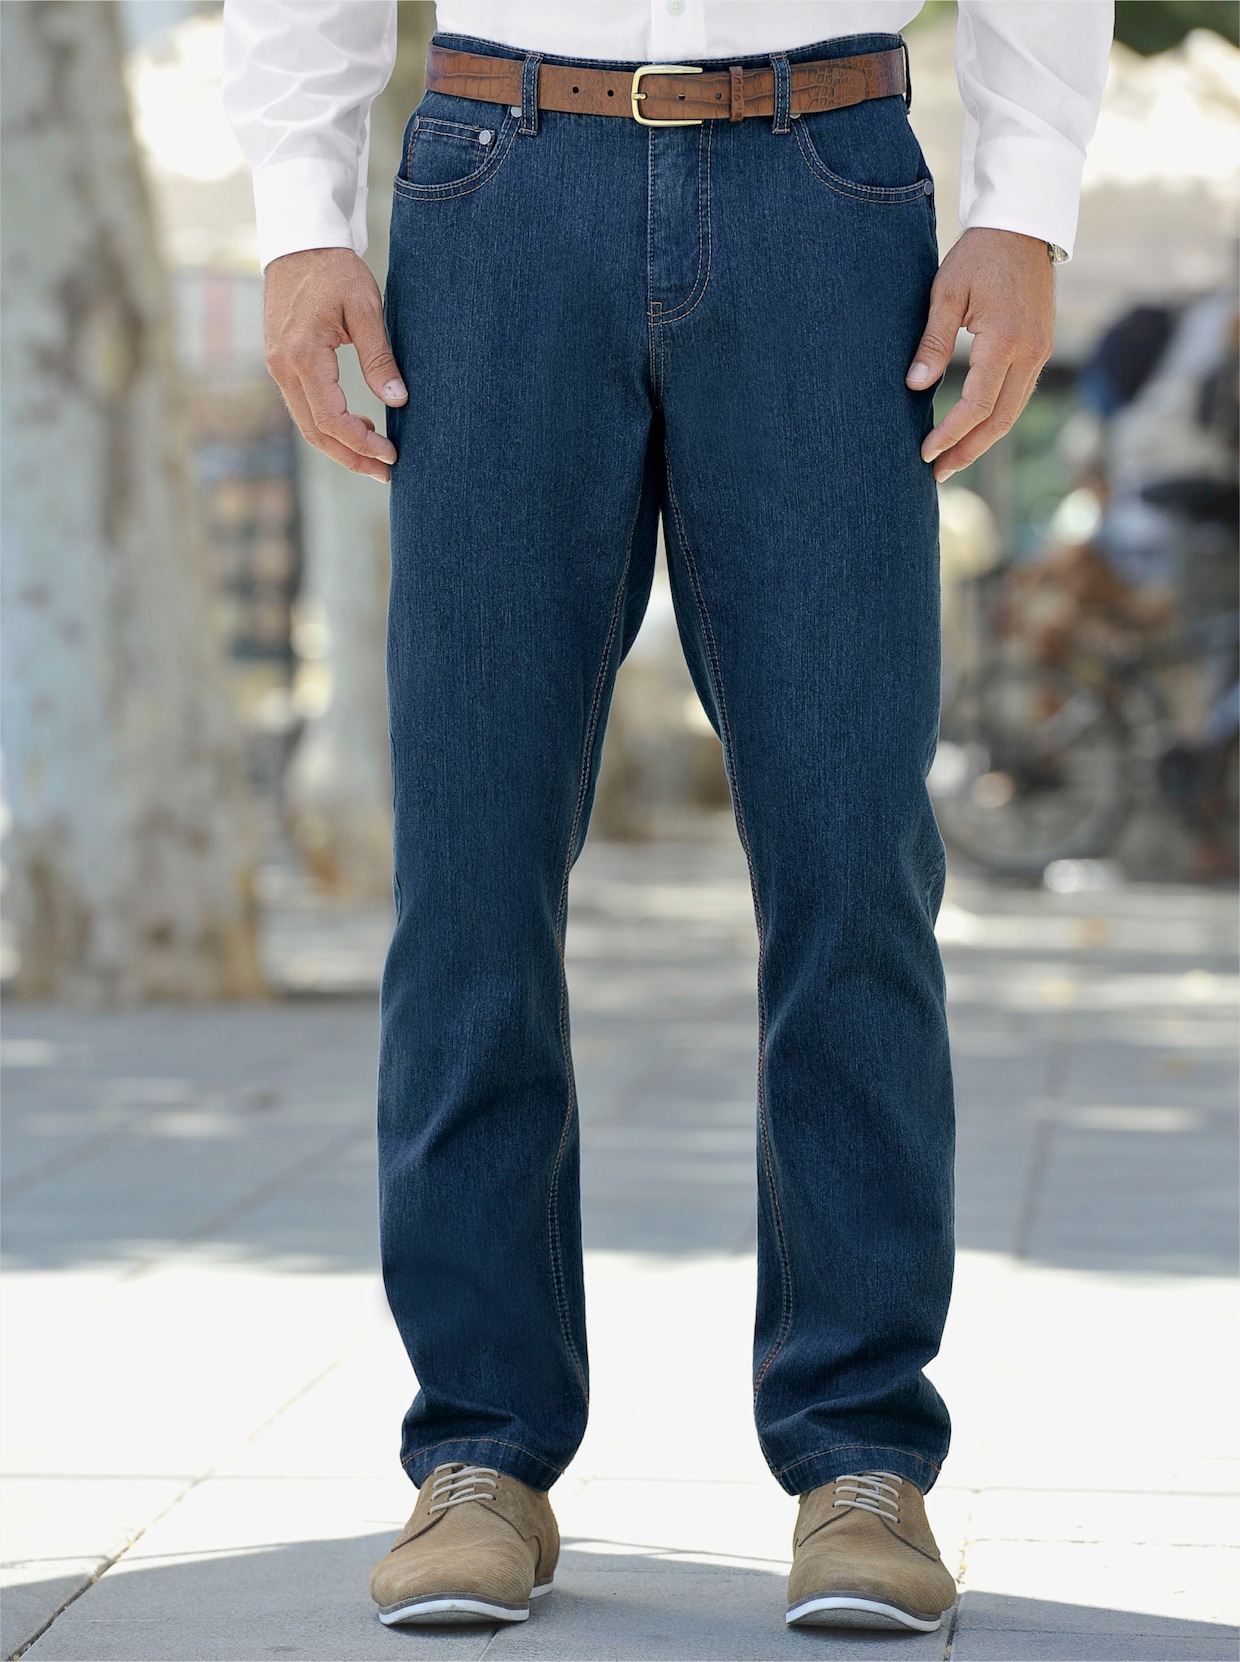 Marco Donati Jeans - blue-stone-washed